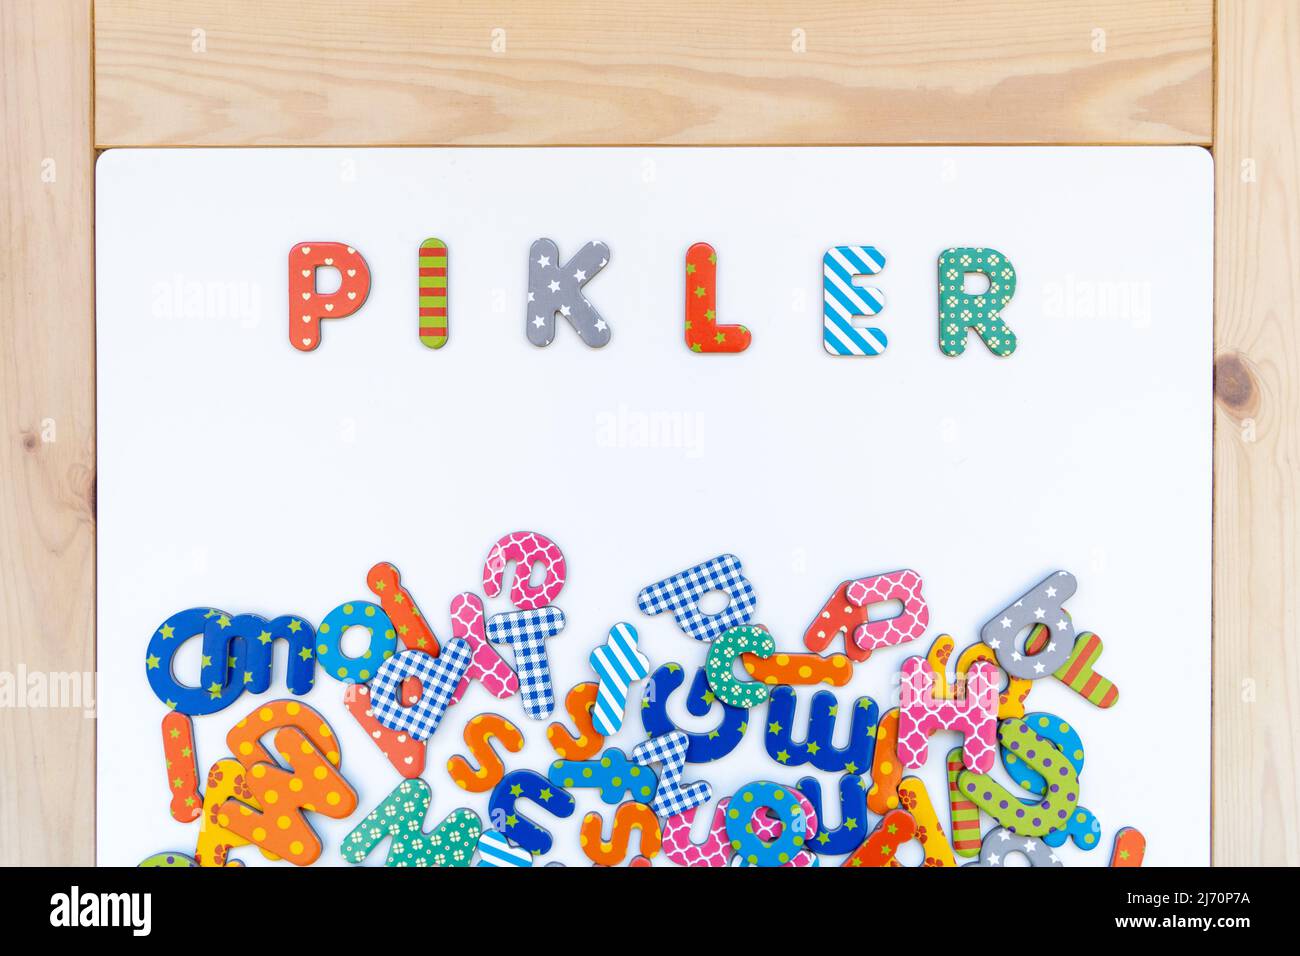 Pikler text. Pikler pedagogy is one of the alternative teaching methods that are supported by science. Stock Photo